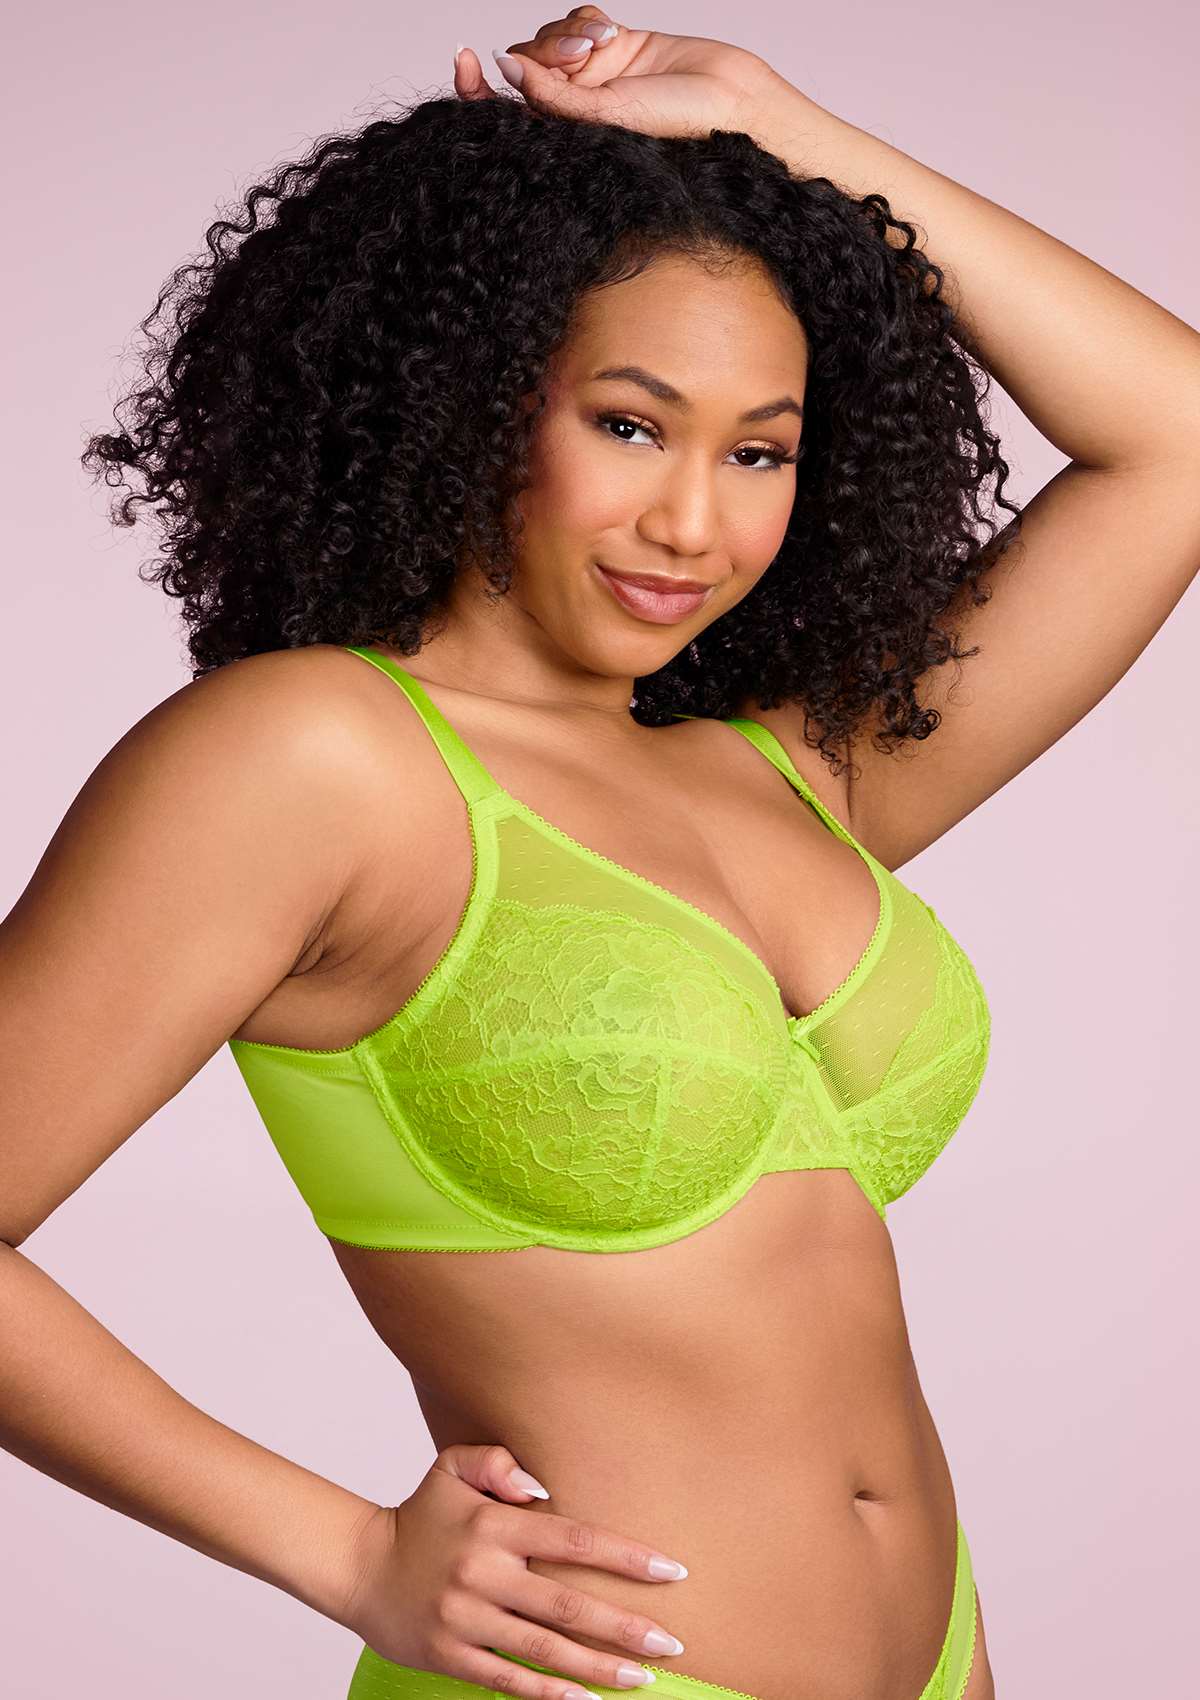 HSIA Enchante Full Cup Minimizing Bra: Supportive Unlined Lace Bra - Lime Green / 46 / DD/E